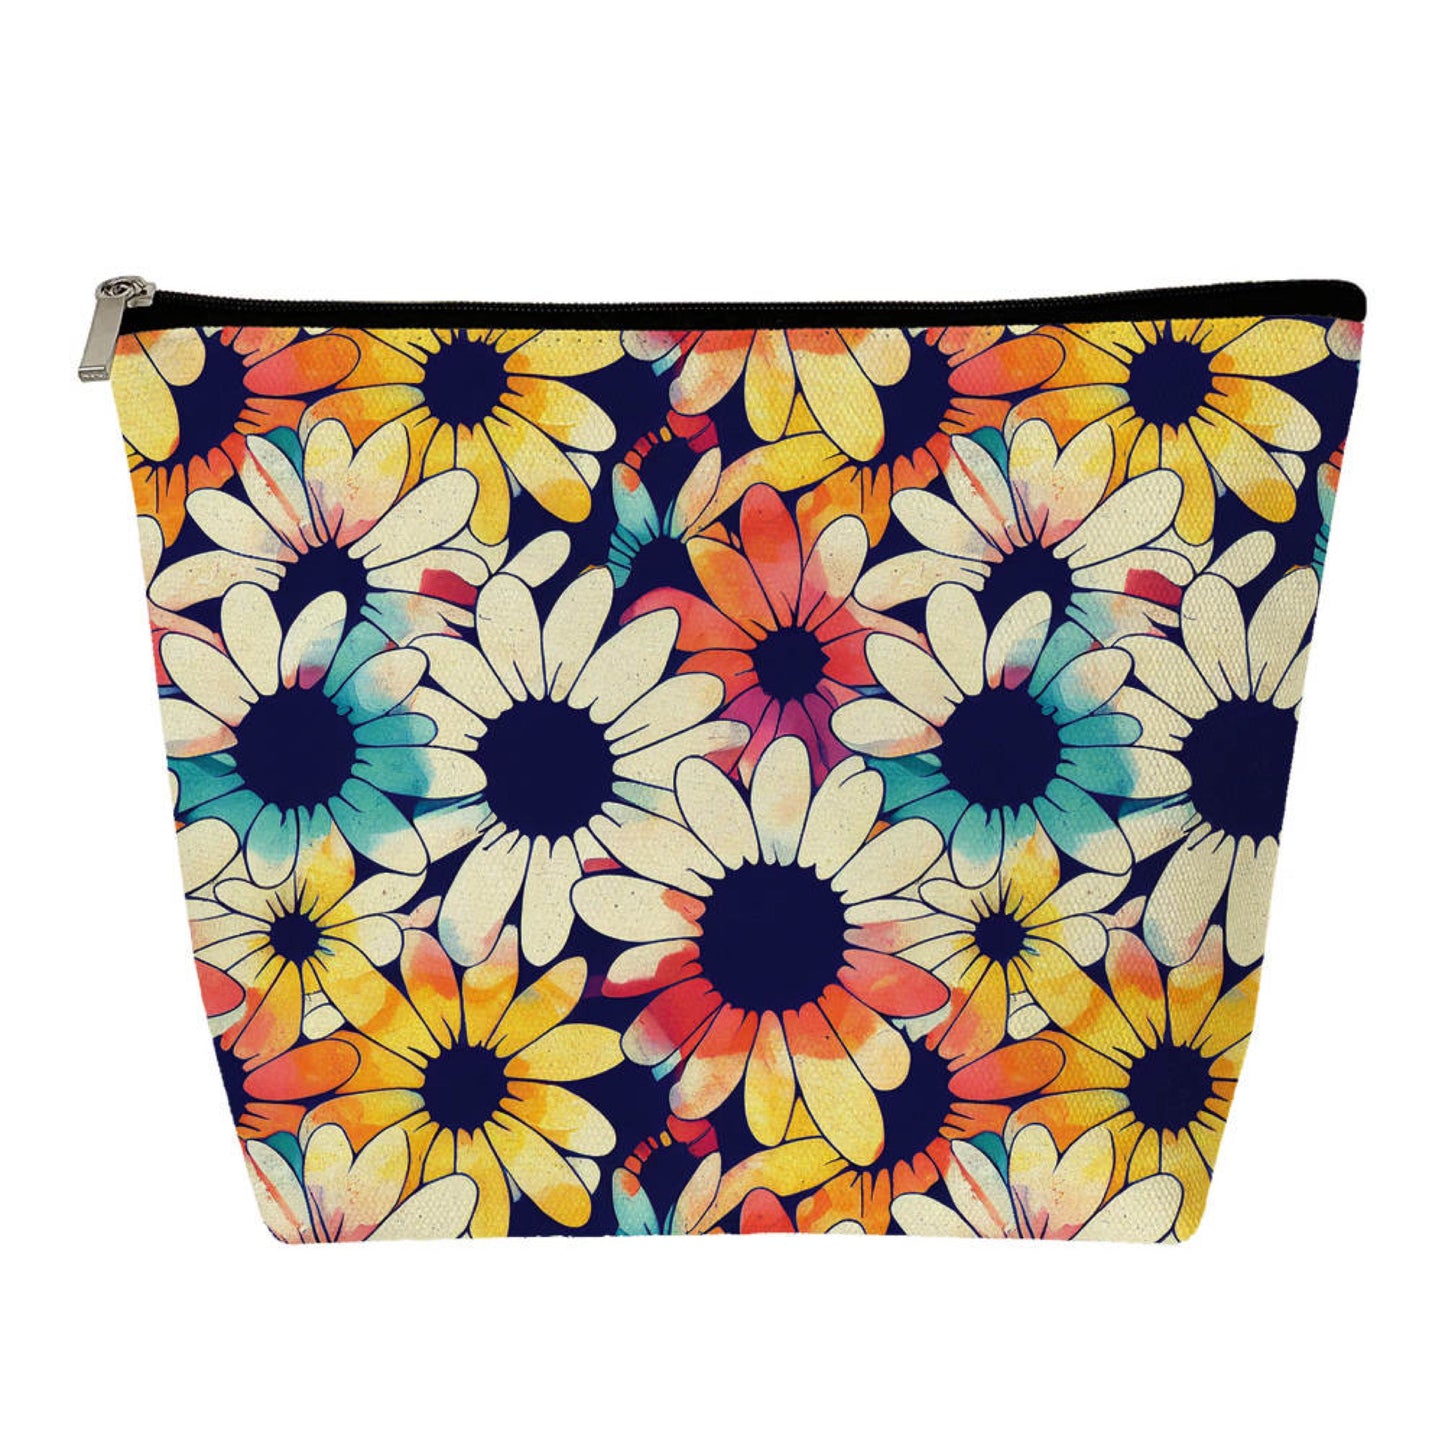 Rainbow Daisy - Water-Resistant Multi-Use XL Pouch